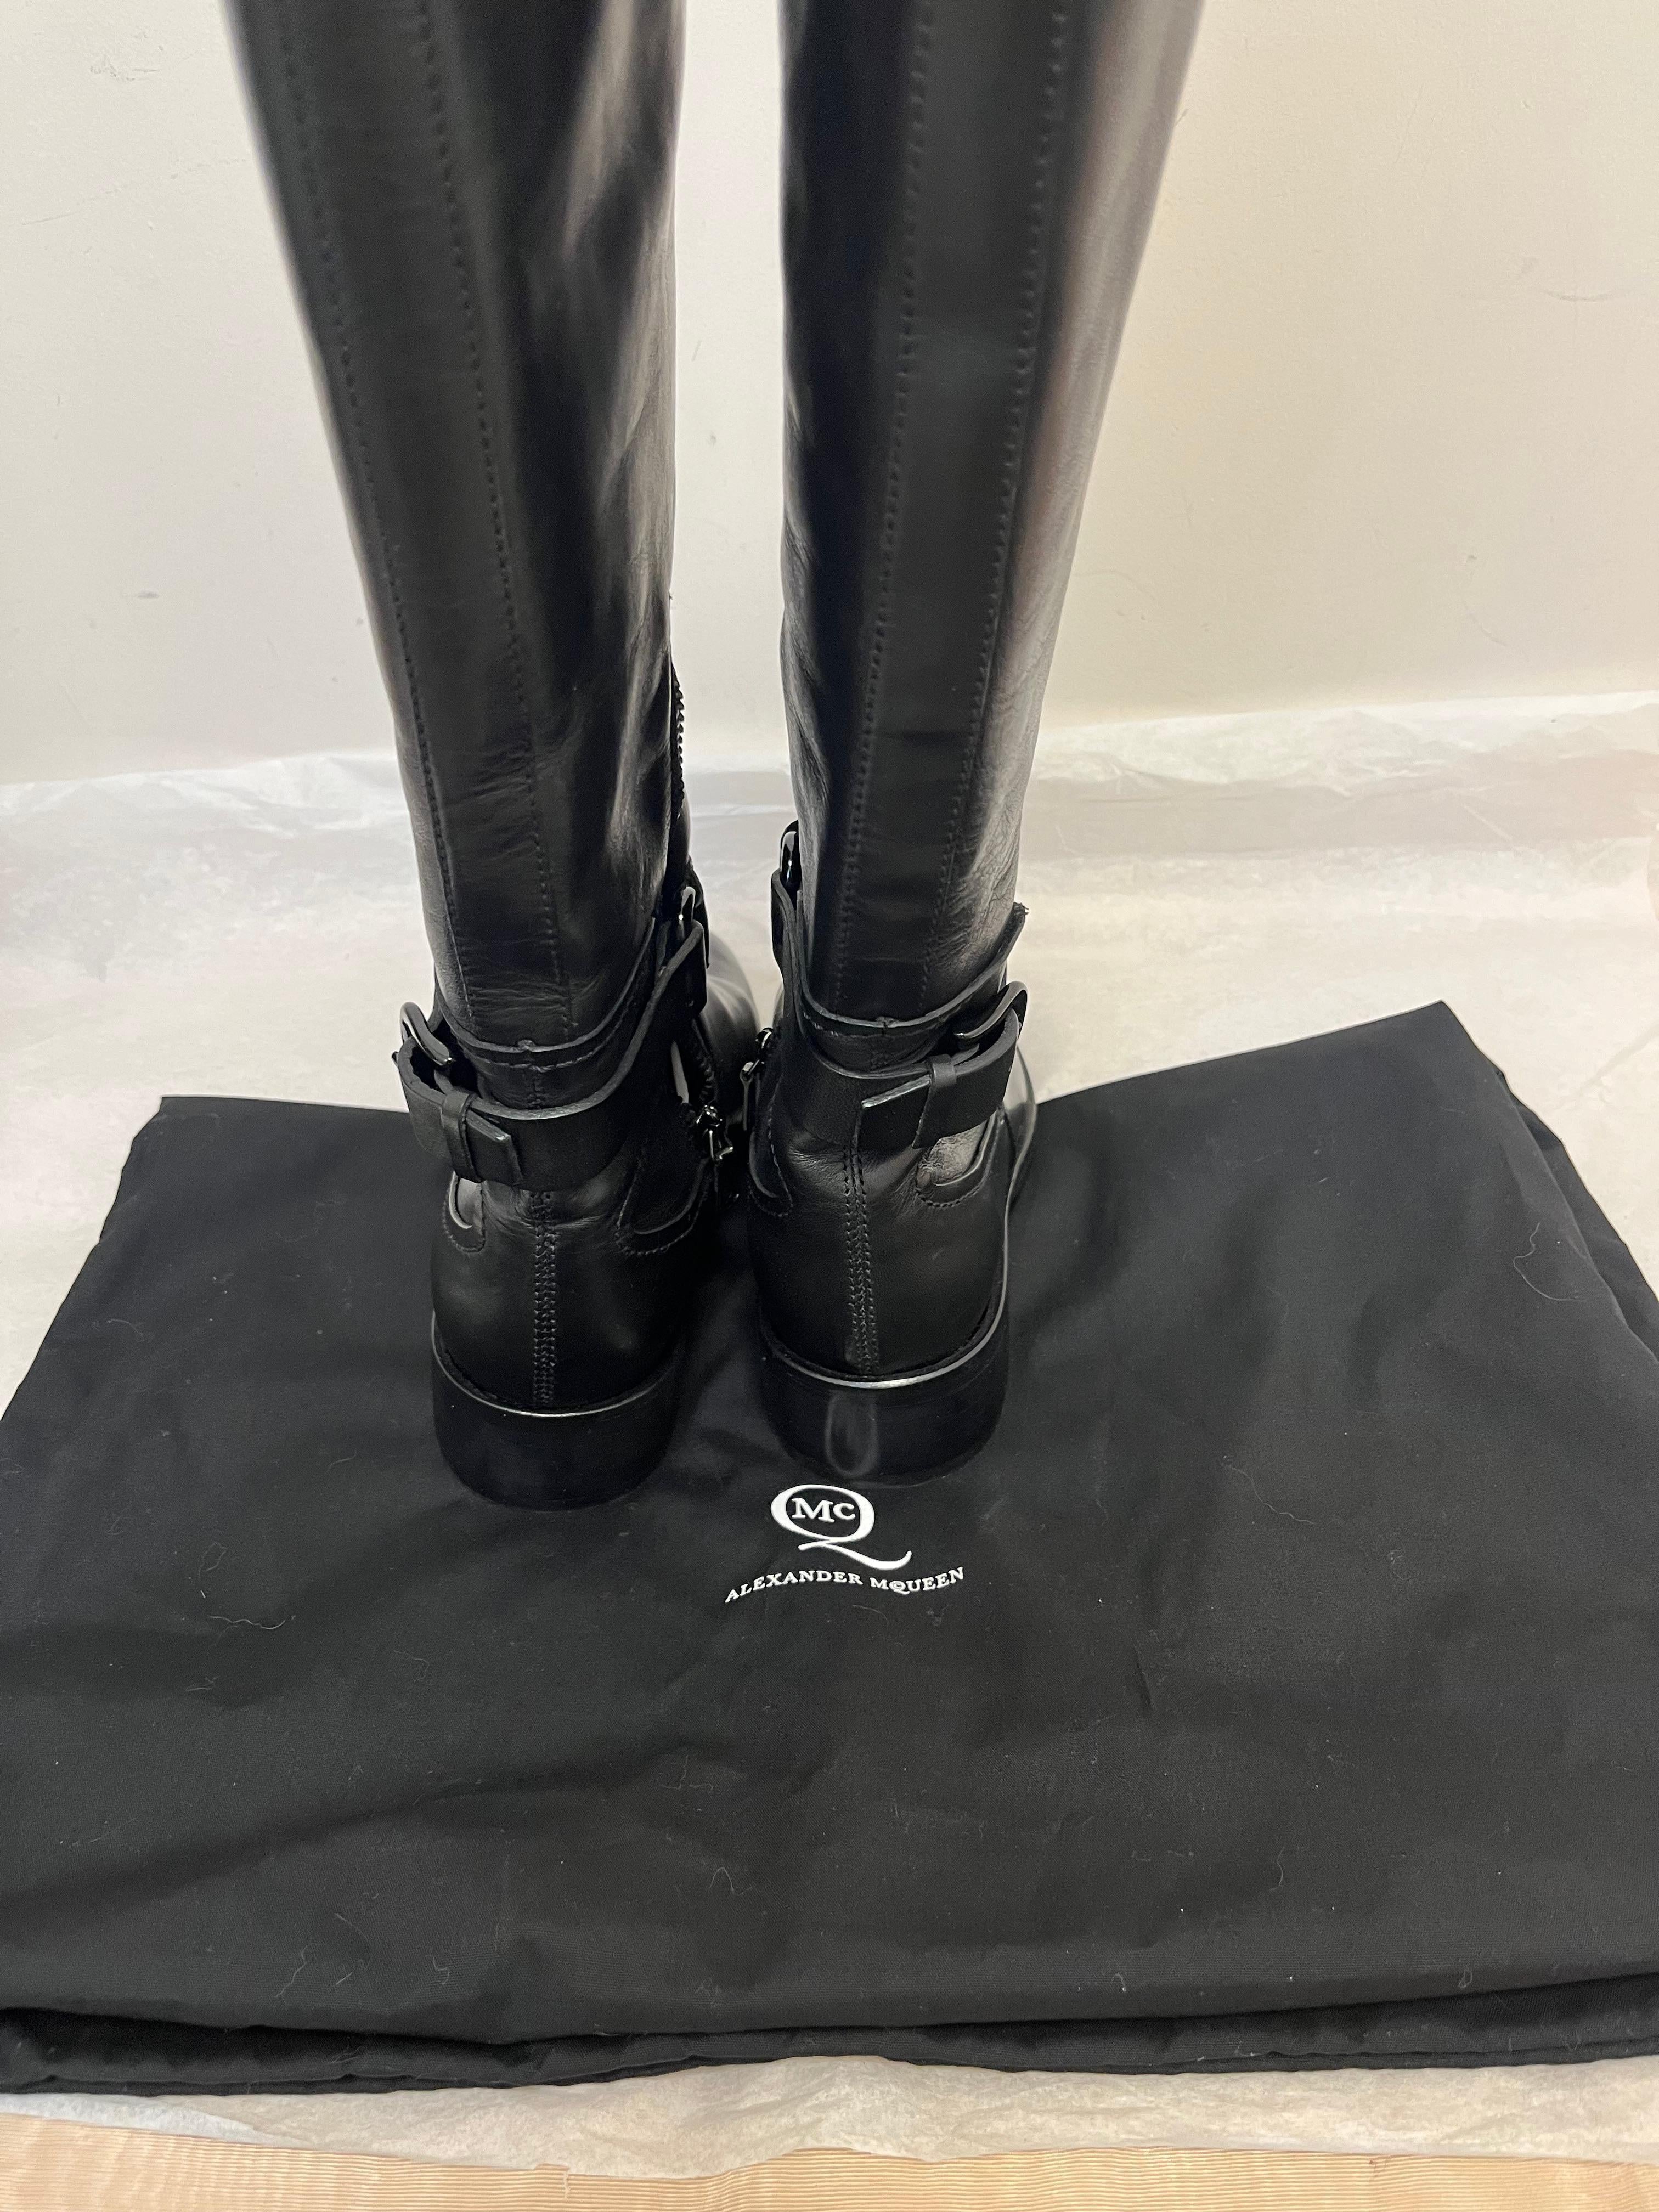 Women's Alexander McQueen Bridal Riding Boots Size 7 w/Box, Dust Bag and Literature